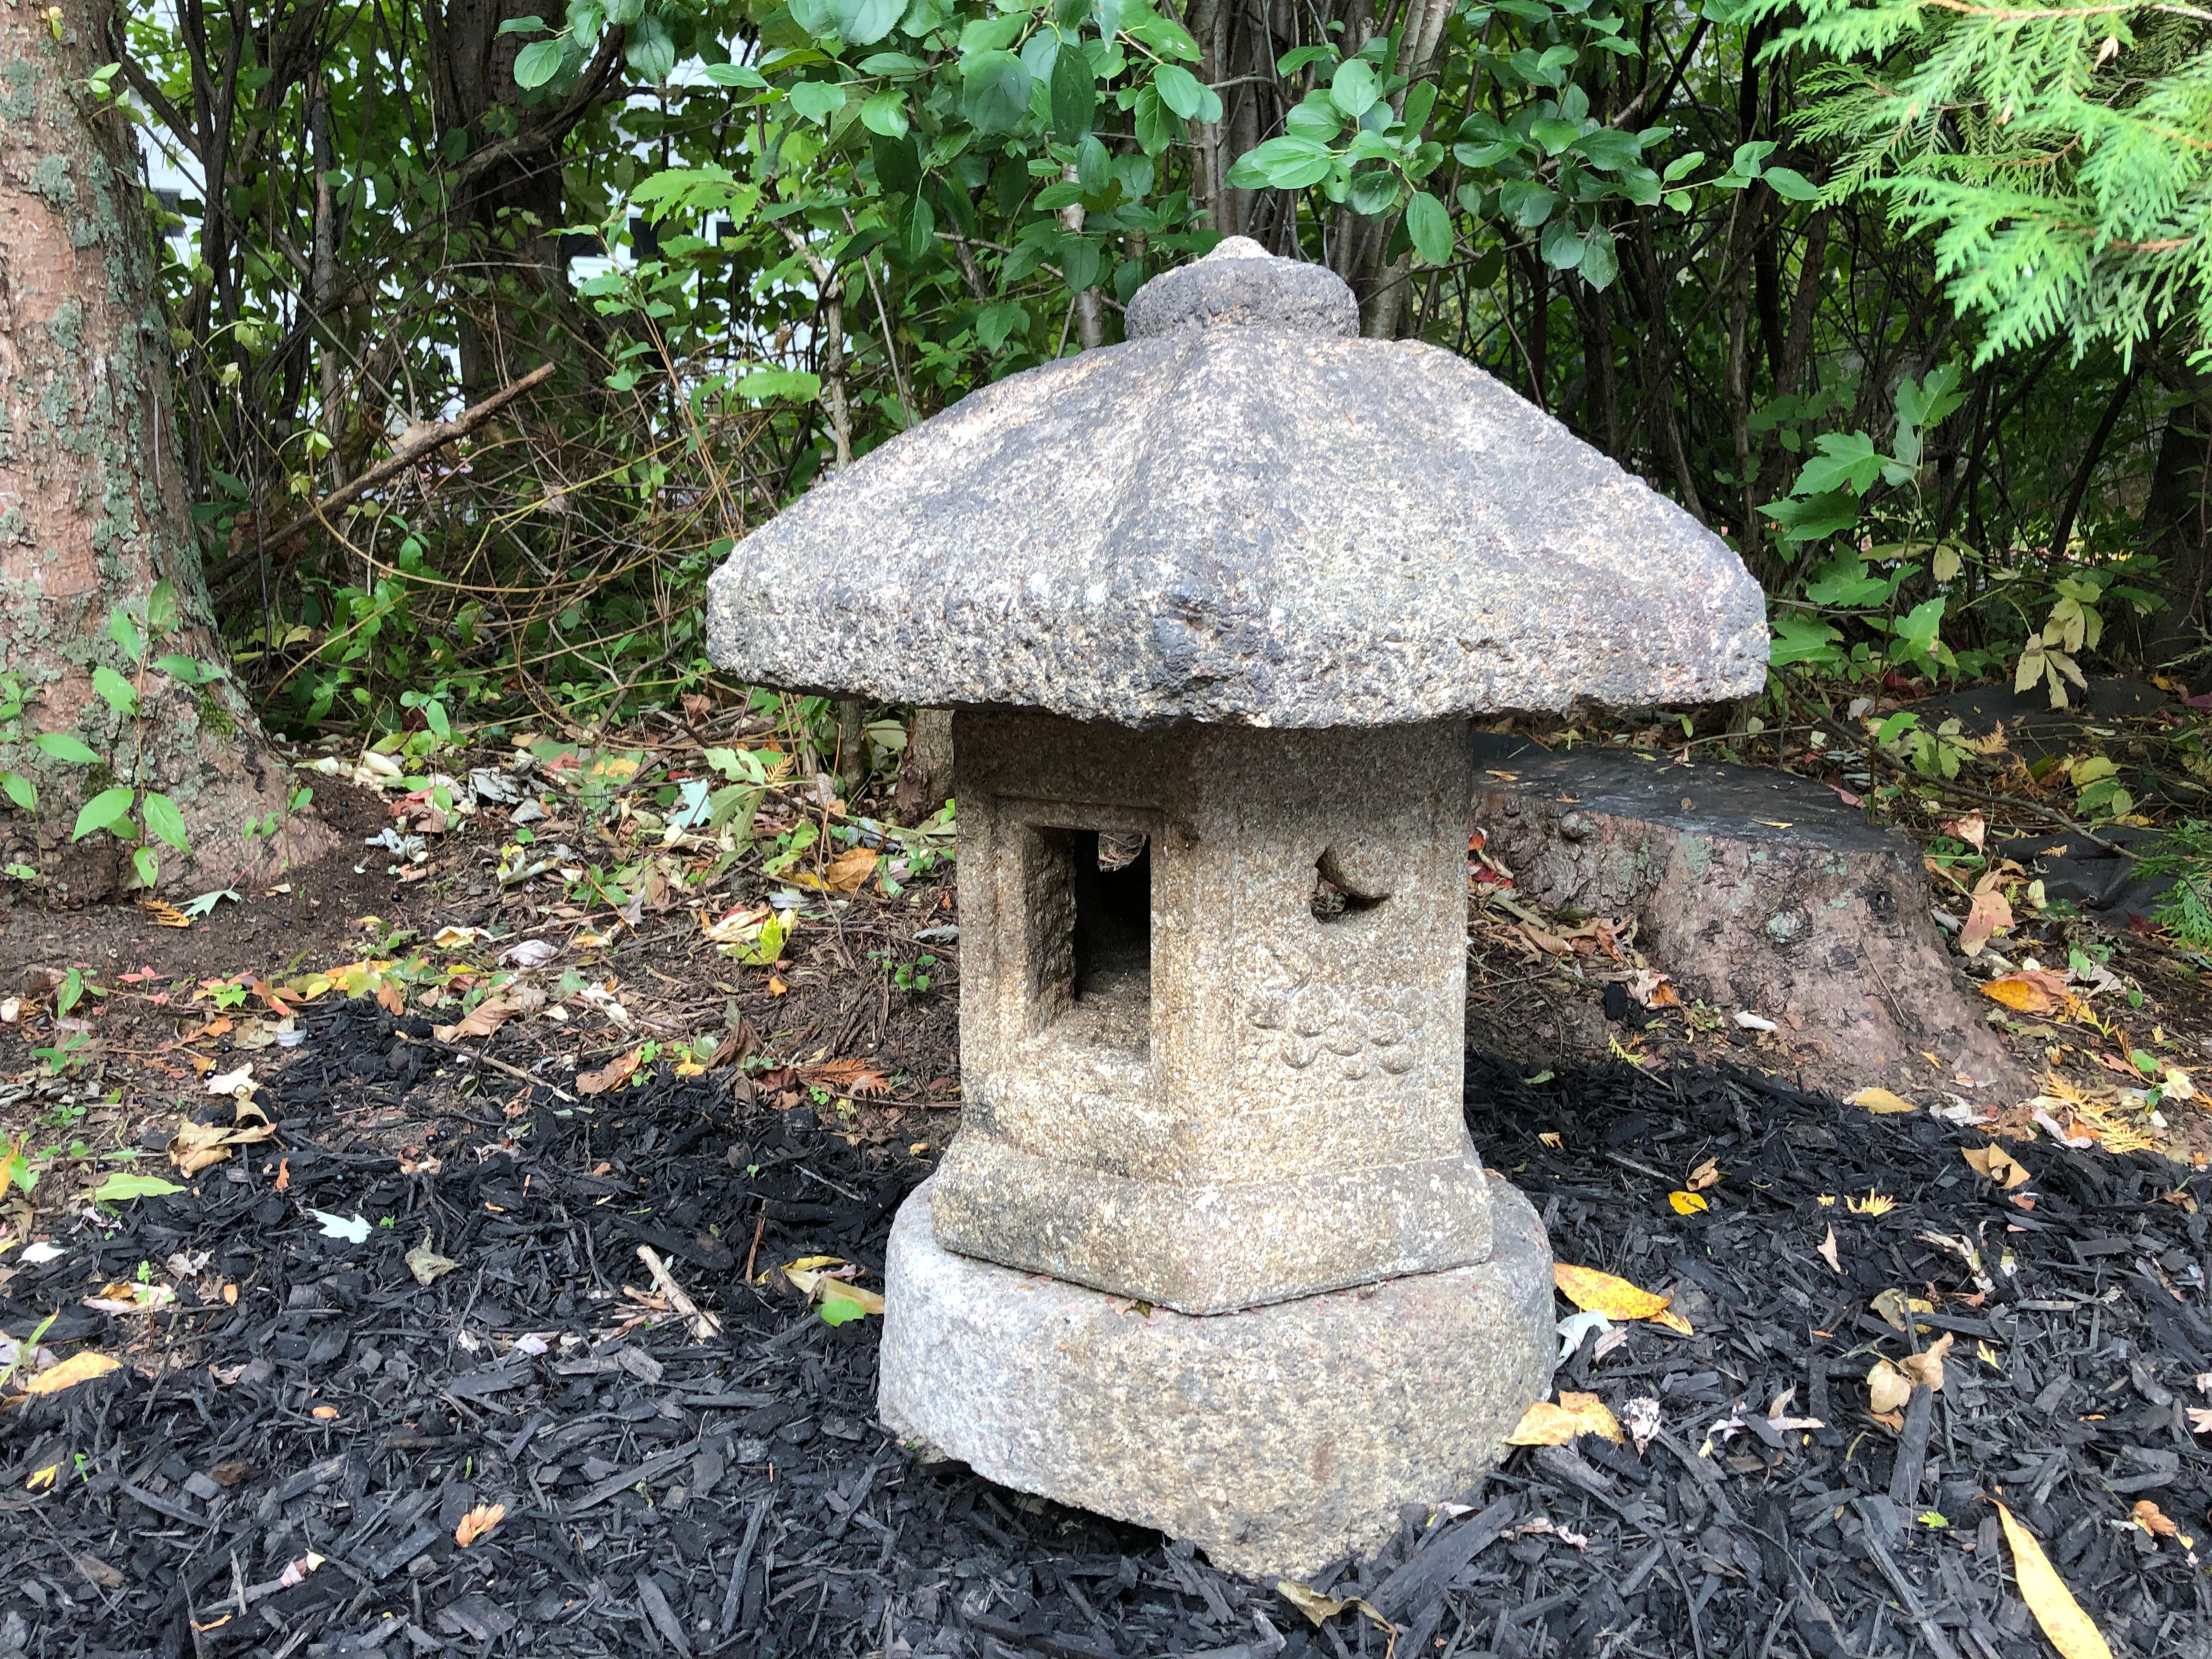 Found on our last trip to Japan.

An Antique Okigata (portable) three piece stone lantern with thick and heavy dark patina from great age. The firebox engraved with fine designs of birds, a tiger, and mountainside symbols. 

Dimensions: 30 inches